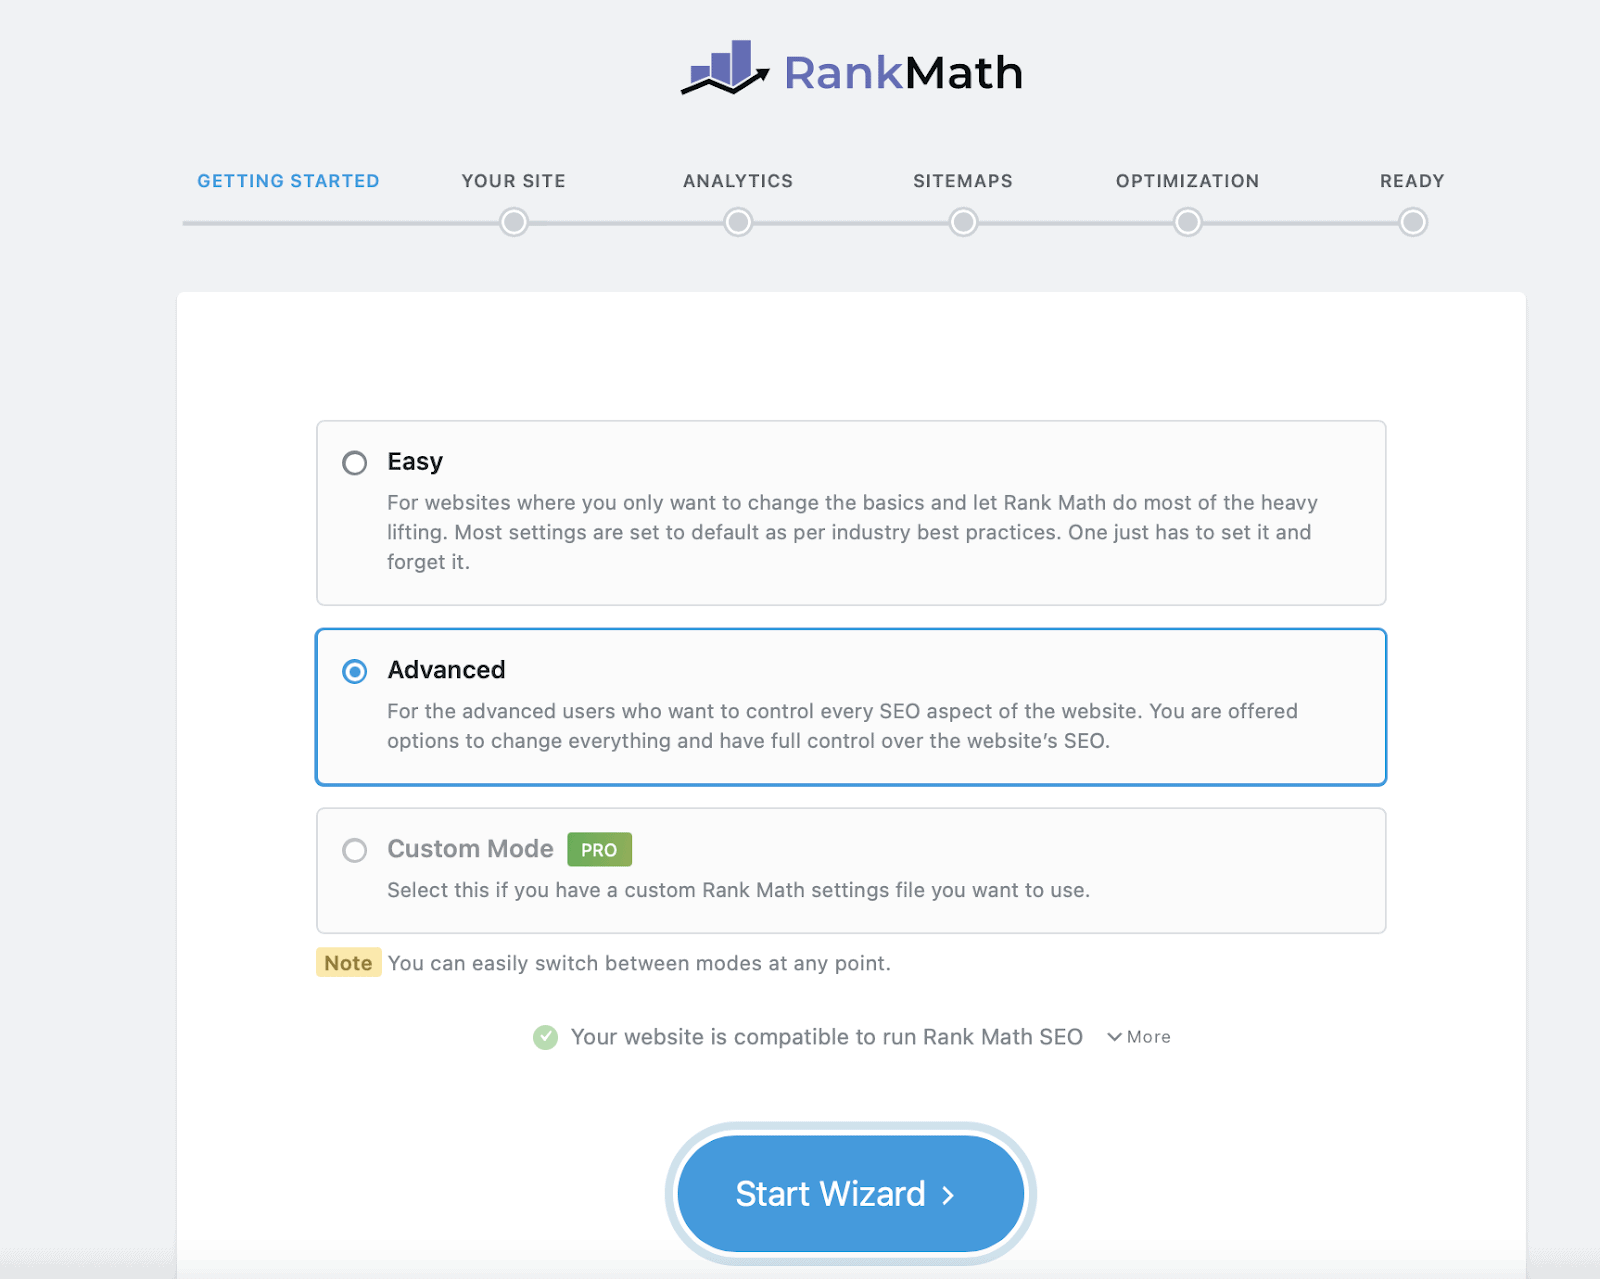 Features - easy to follow - Rankmath